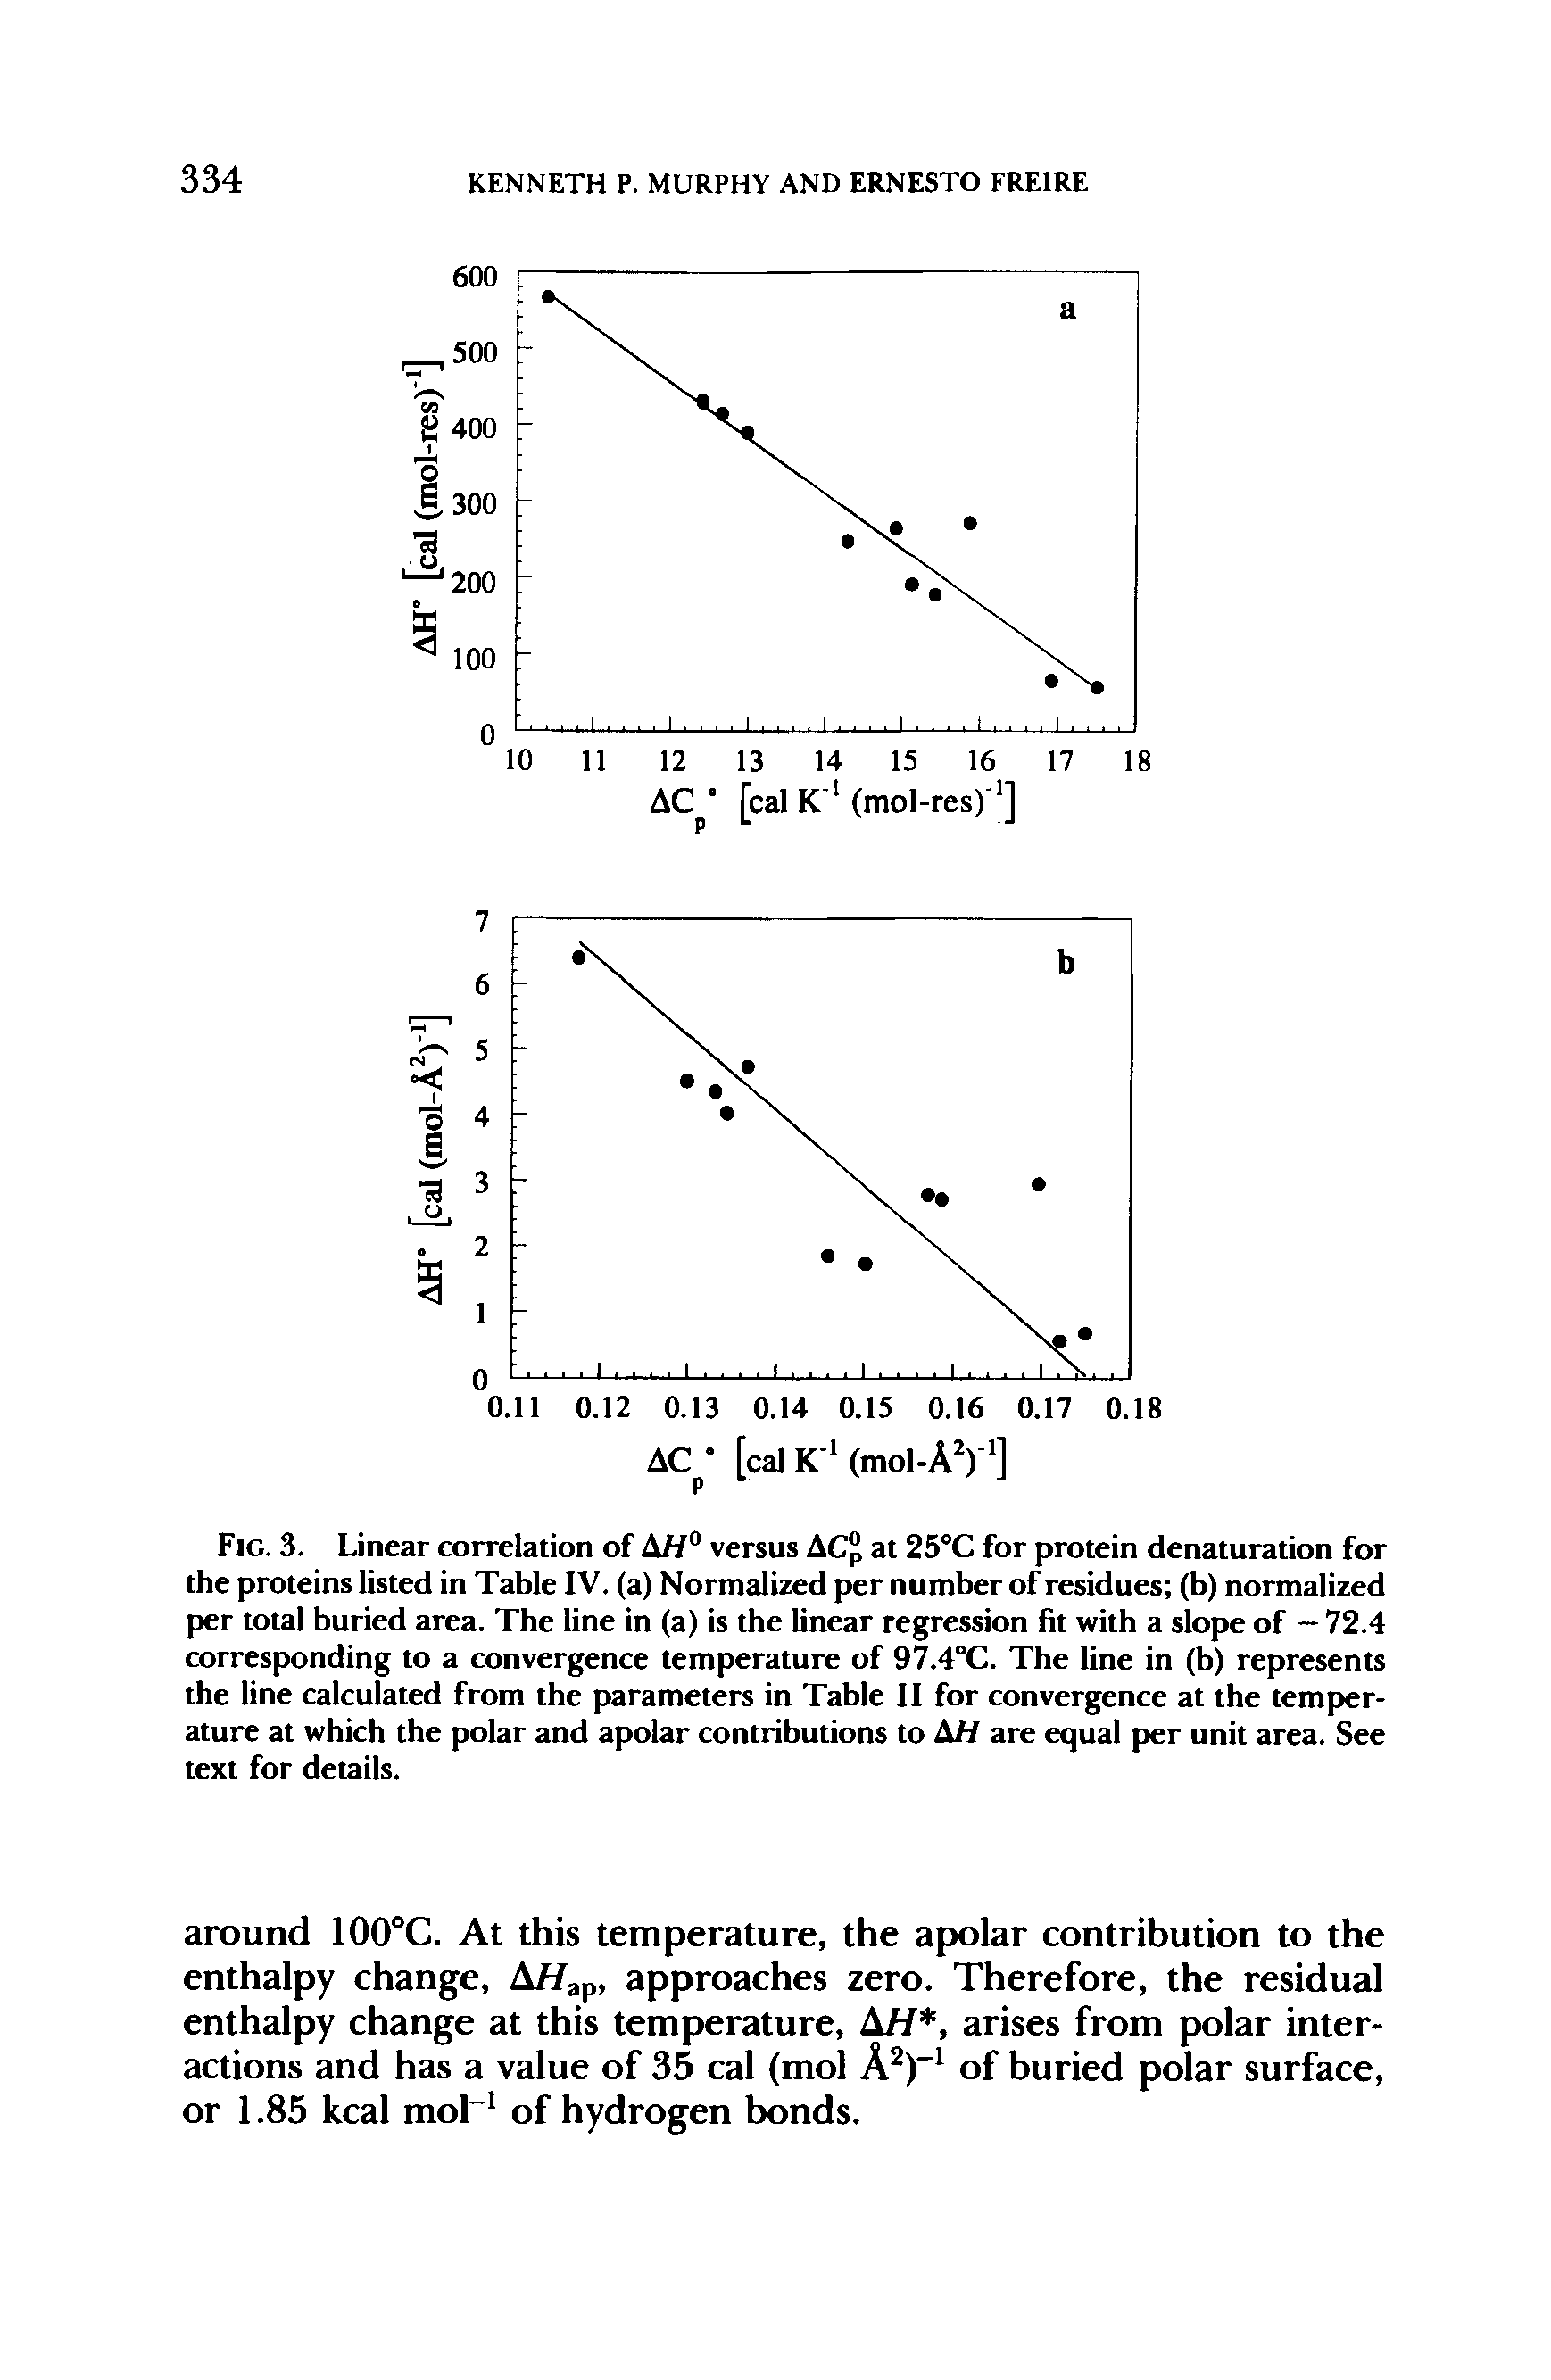 Fig. 3. Linear correlation of AH0 versus ACp at 25°C for protein denaturation for the proteins listed in Table IV. (a) Normalized per number of residues (b) normalized per total buried area. The line in (a) is the linear regression fit with a slope of — 72.4 corresponding to a convergence temperature of 97.4°C. The line in (b) represents the line calculated from the parameters in Table II for convergence at the temperature at which the polar and apolar contributions to AH are equal per unit area. See text for details.